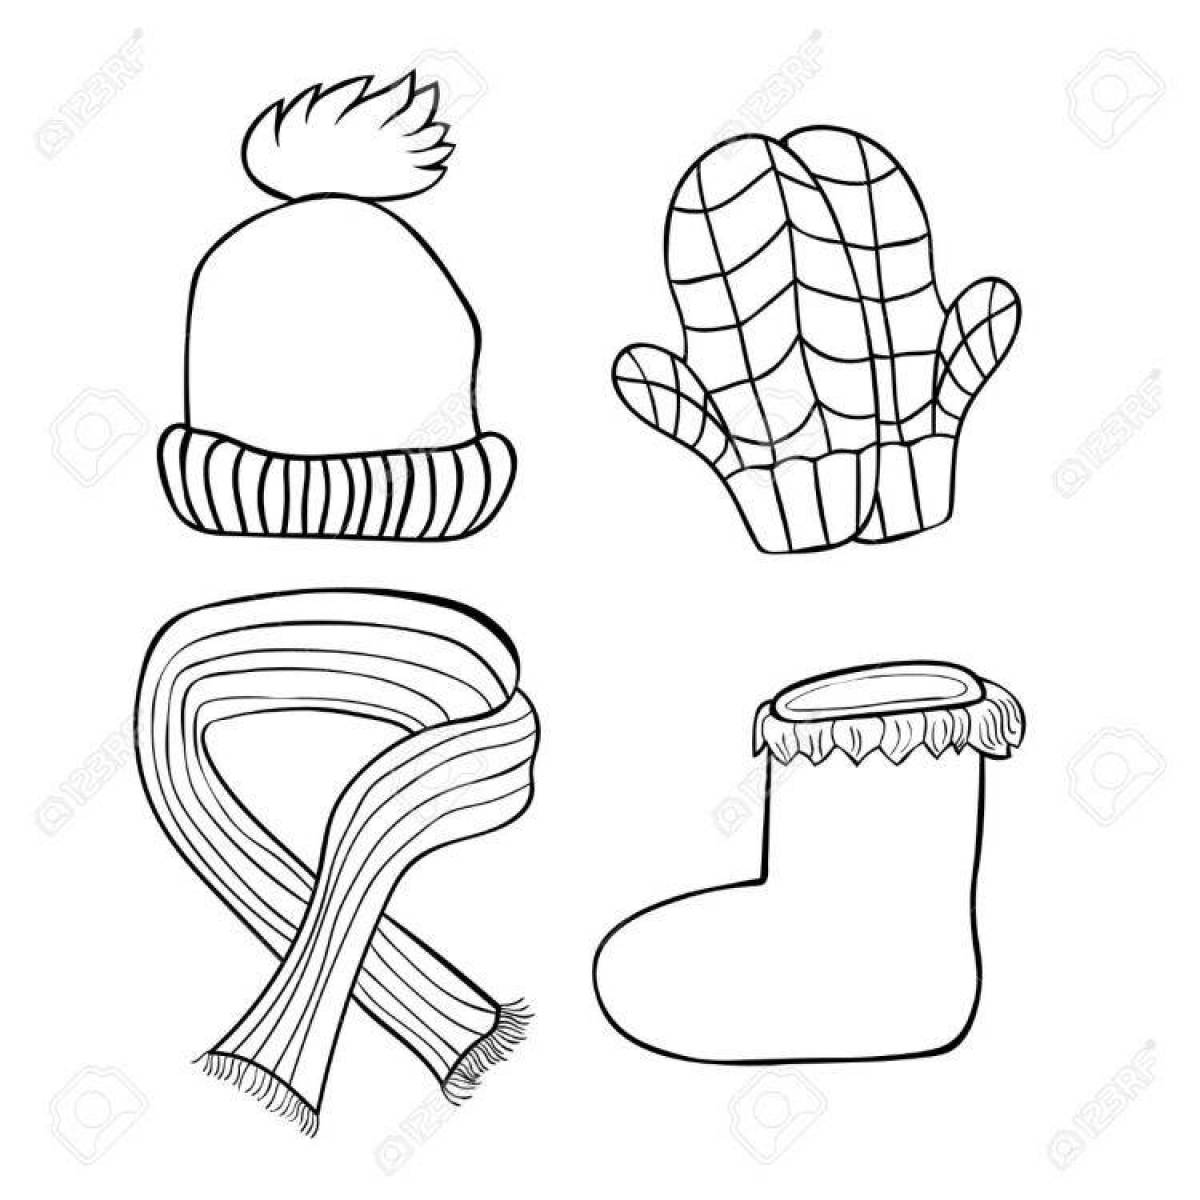 Playful hat and scarf coloring page